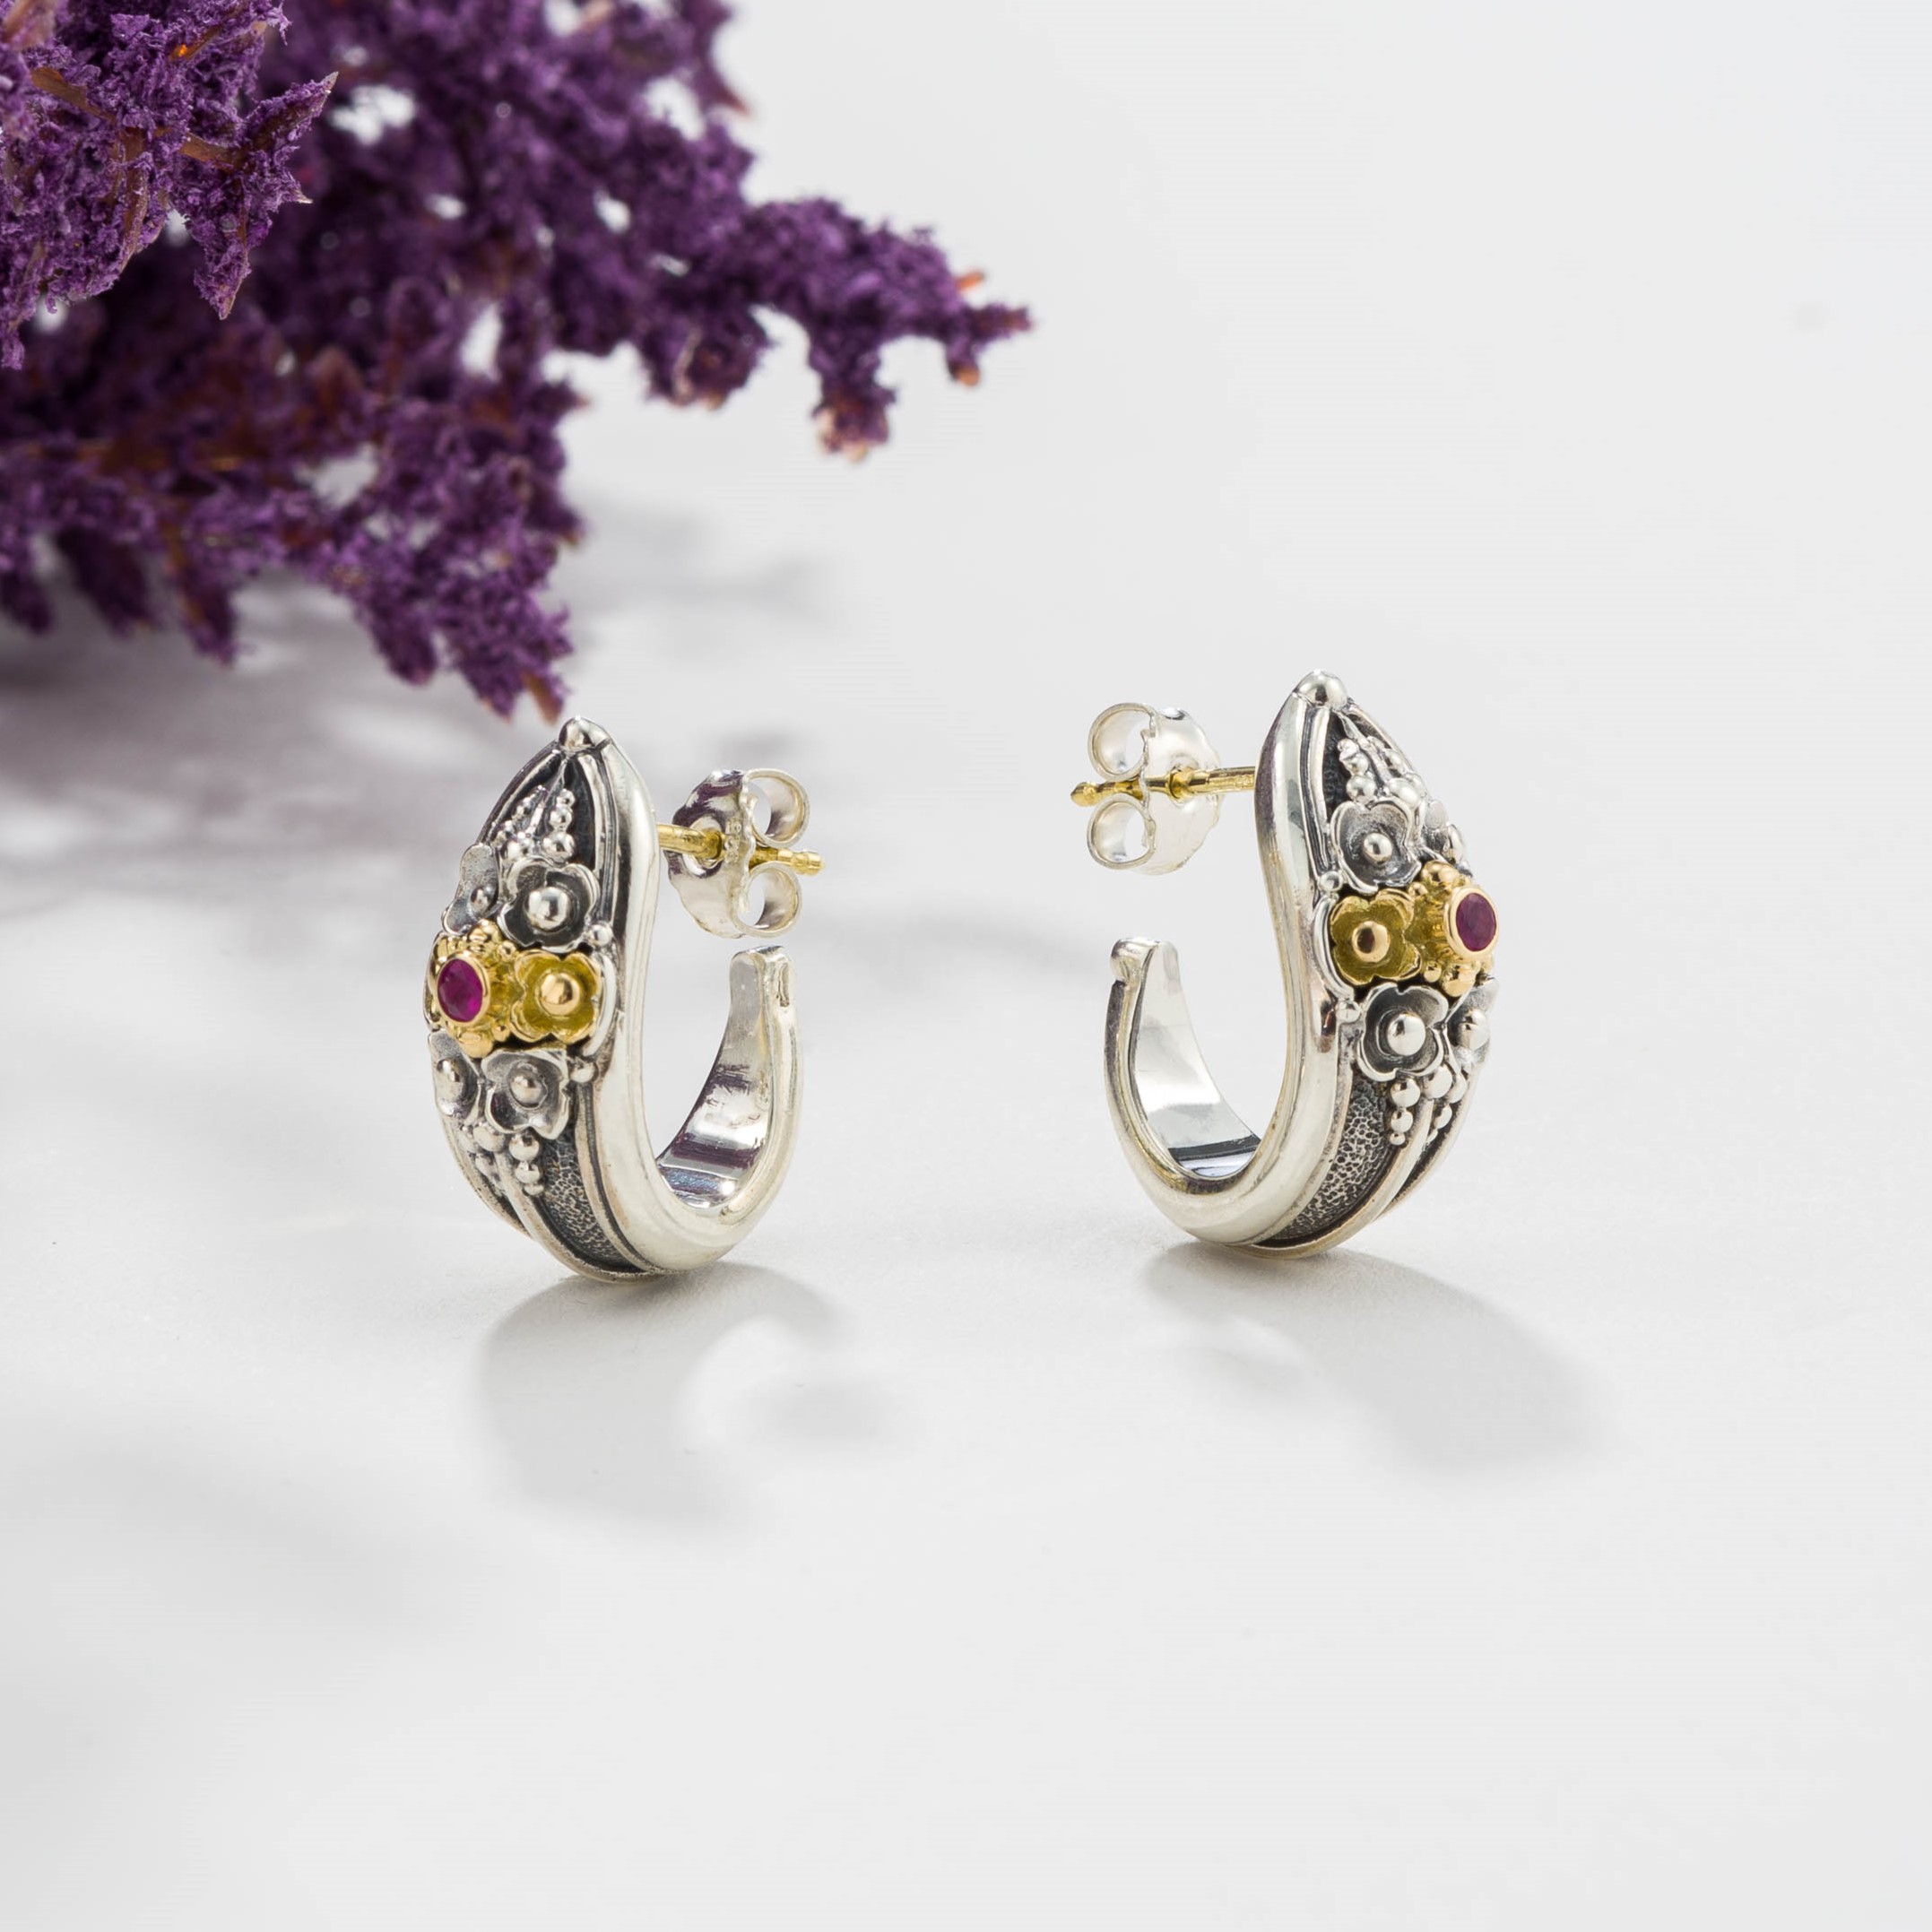 Kassandra half hoops Earrings in 18K Gold and Sterling Silver with Ruby